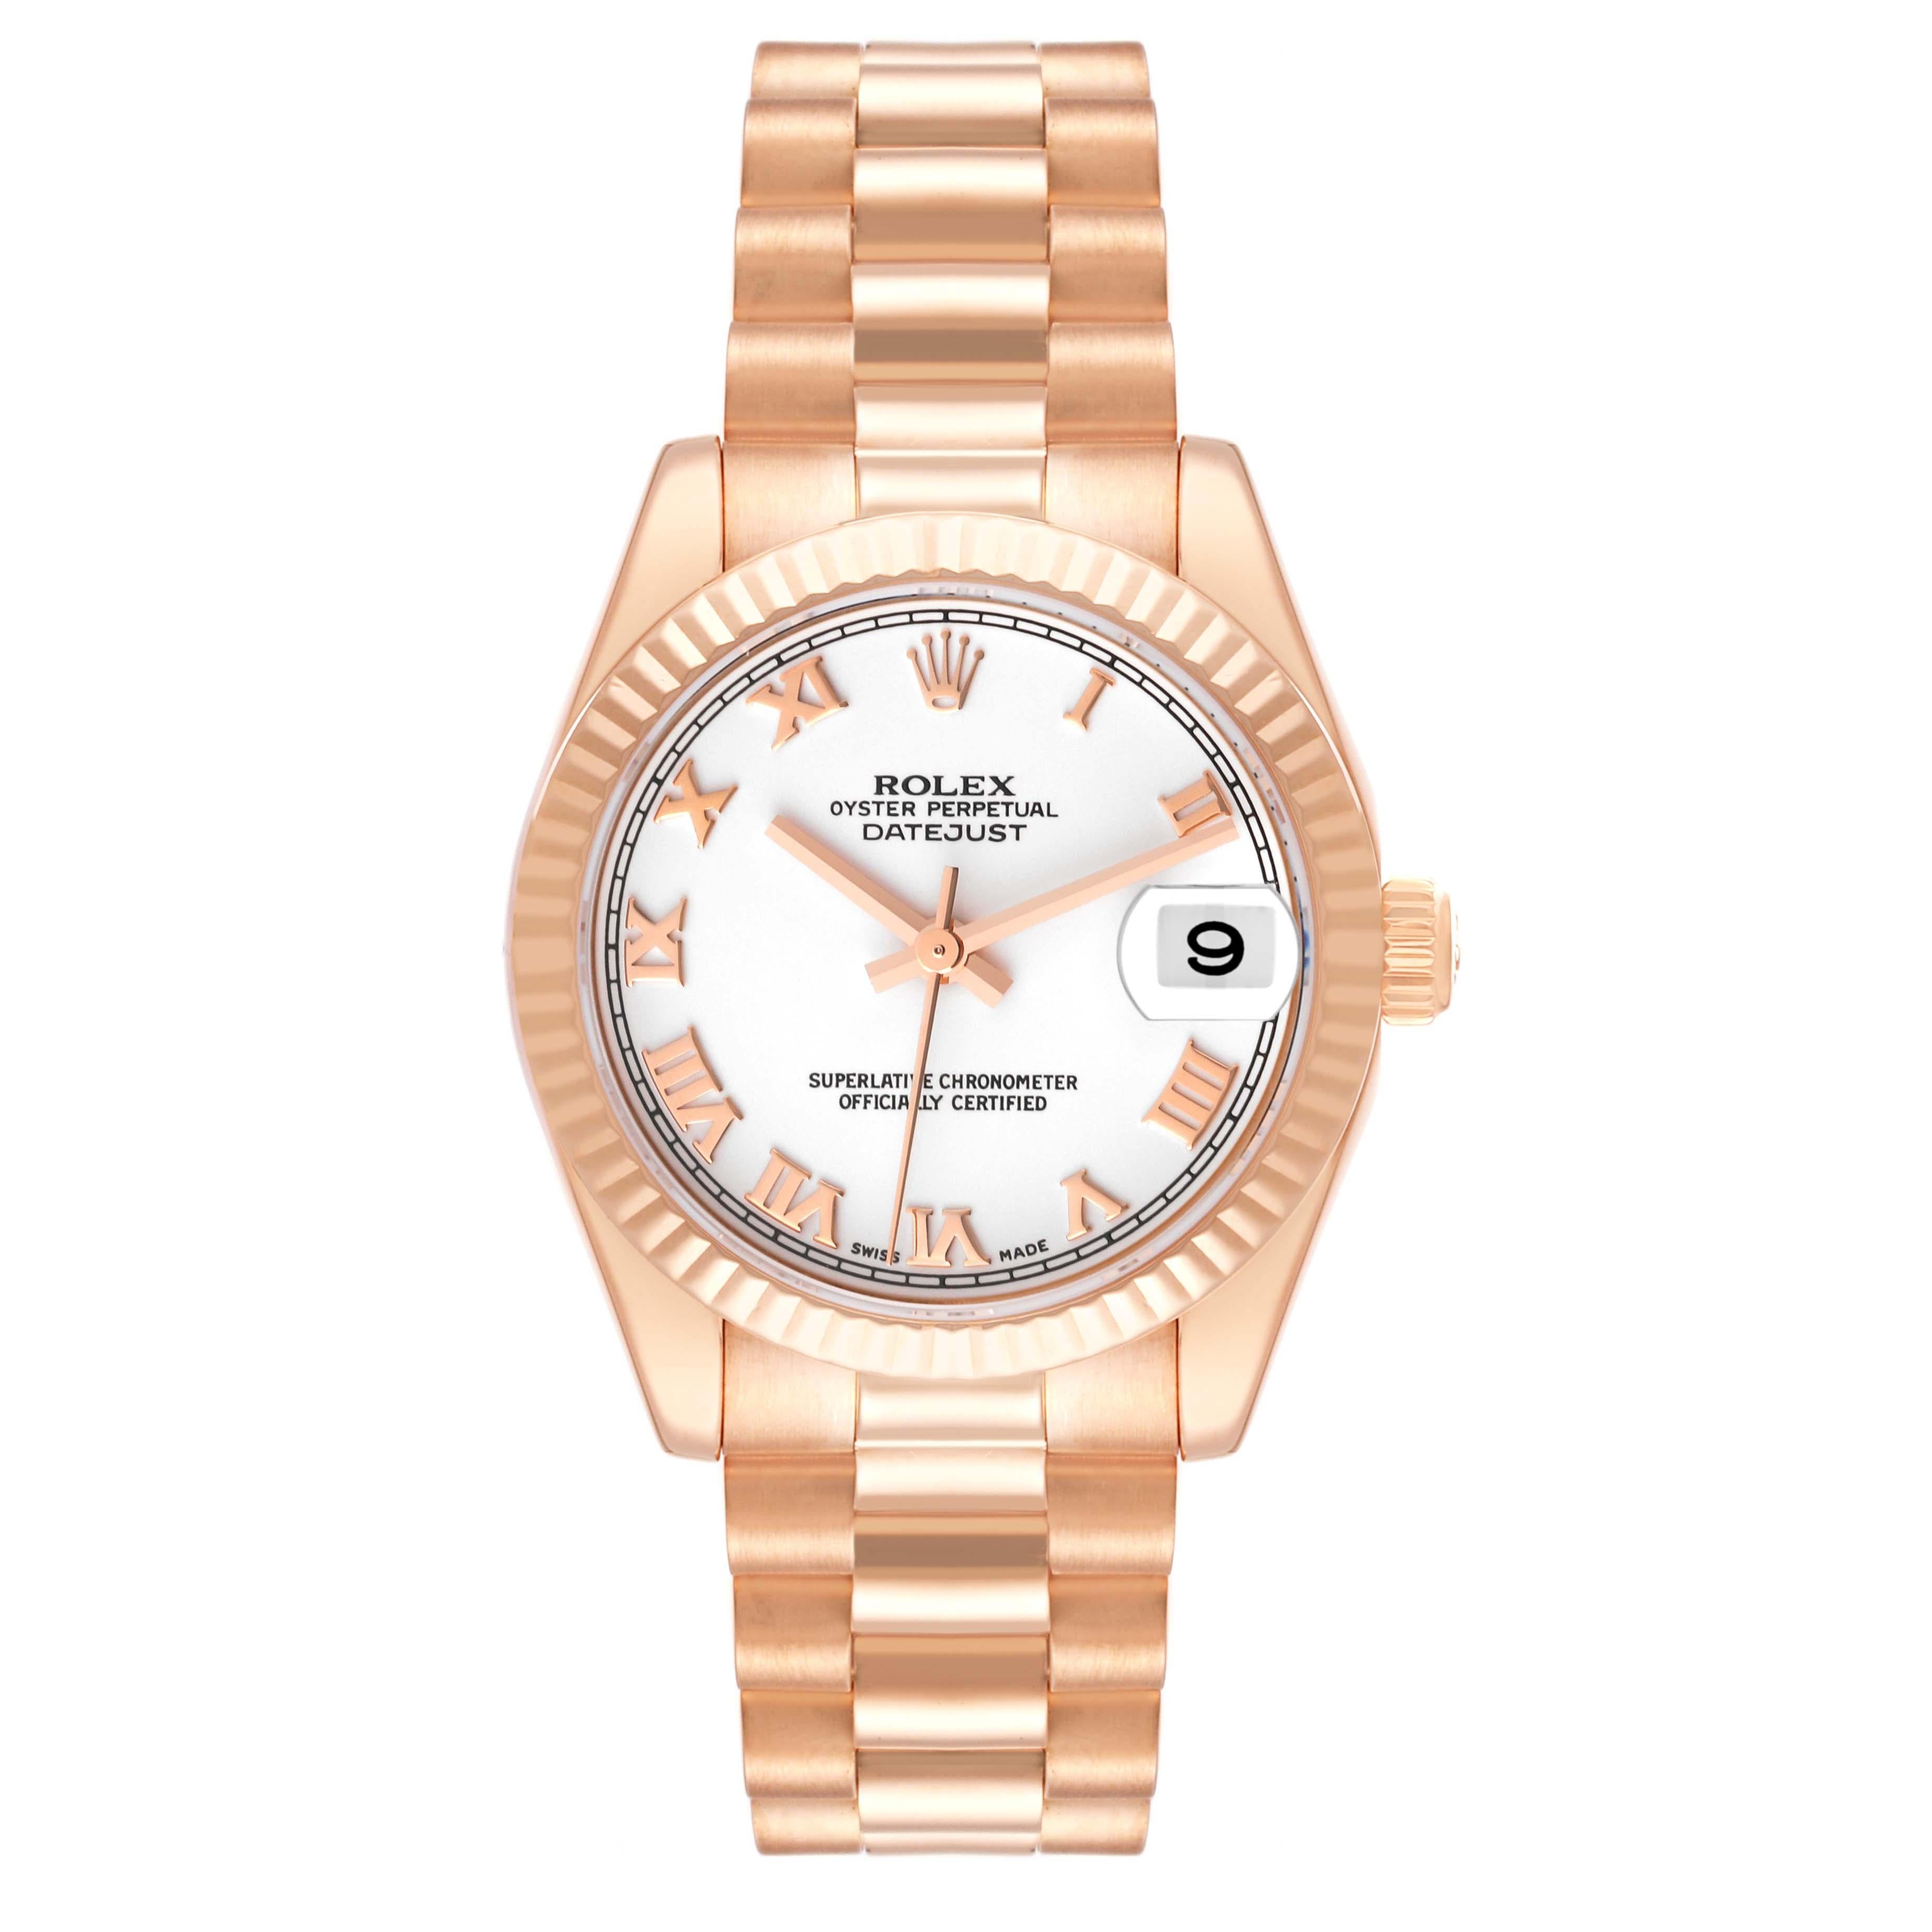 Rolex President Datejust Midsize 31 Rose Gold Ladies Watch 178275. Officially certified chronometer self-winding movement. 18K Everose gold case 31.0 mm in diameter. Rolex logo on the crown. 18k rose gold fluted bezel. Scratch resistant sapphire